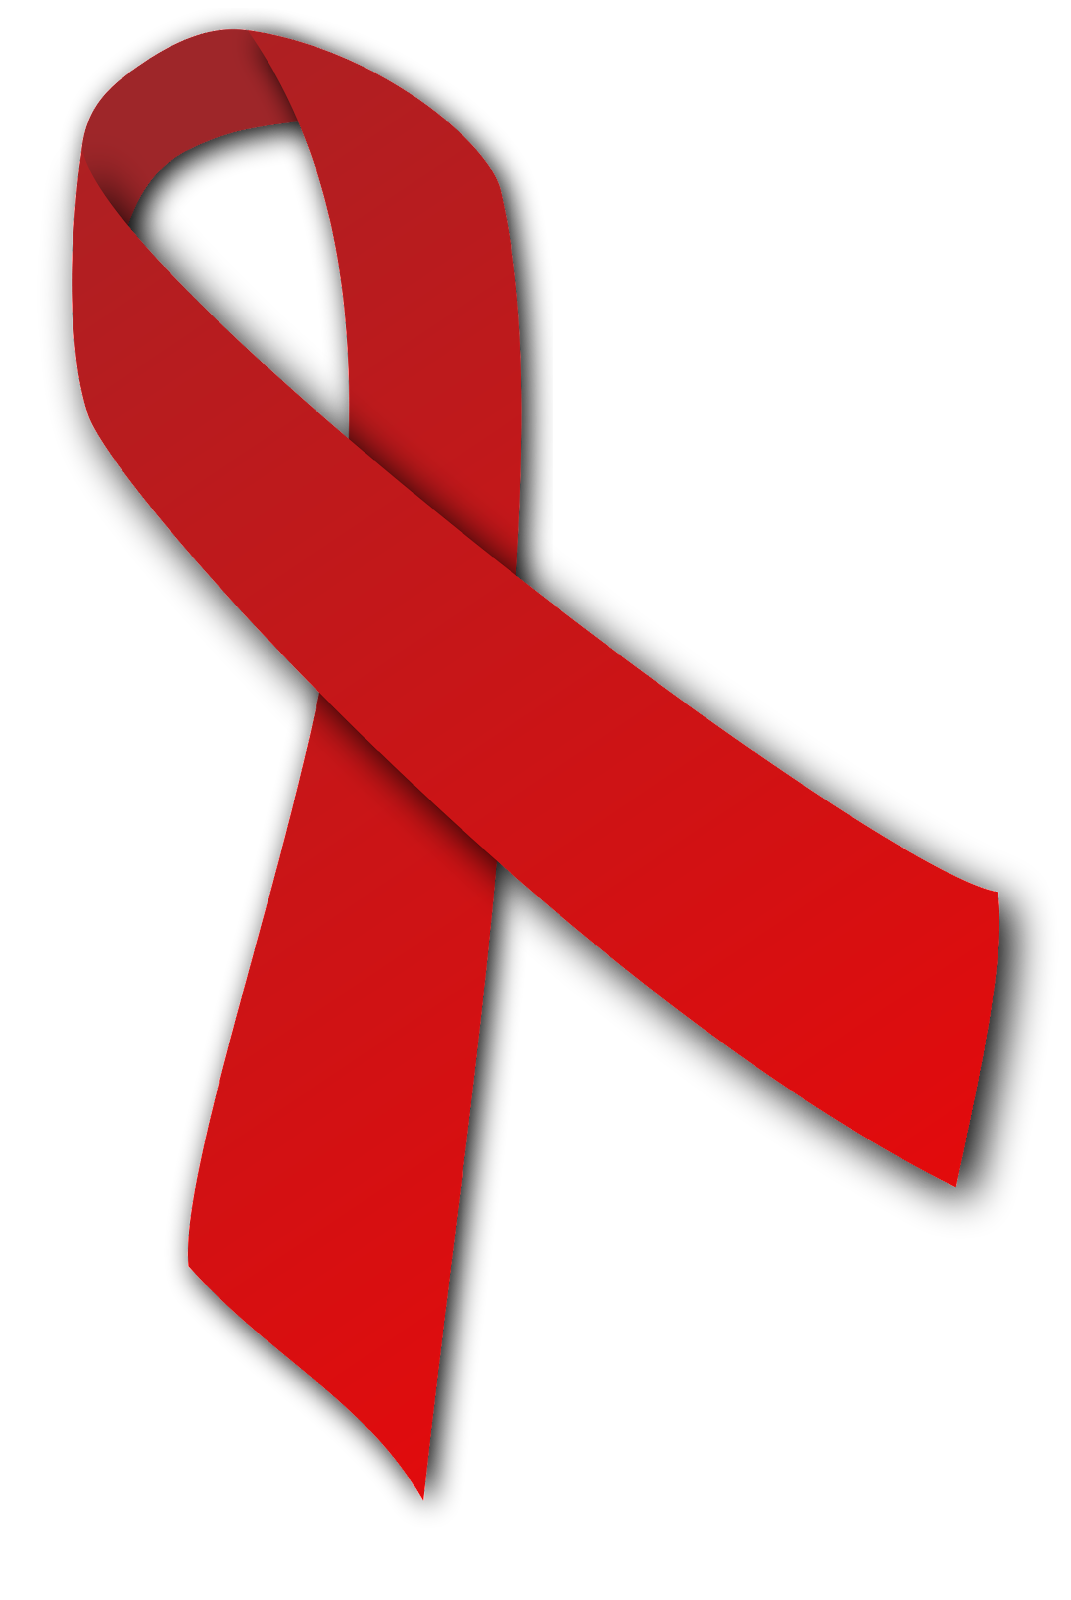 http://www.unadis.it/wp-content/uploads/2019/11/2000px-Red_Ribbon.svg_.png